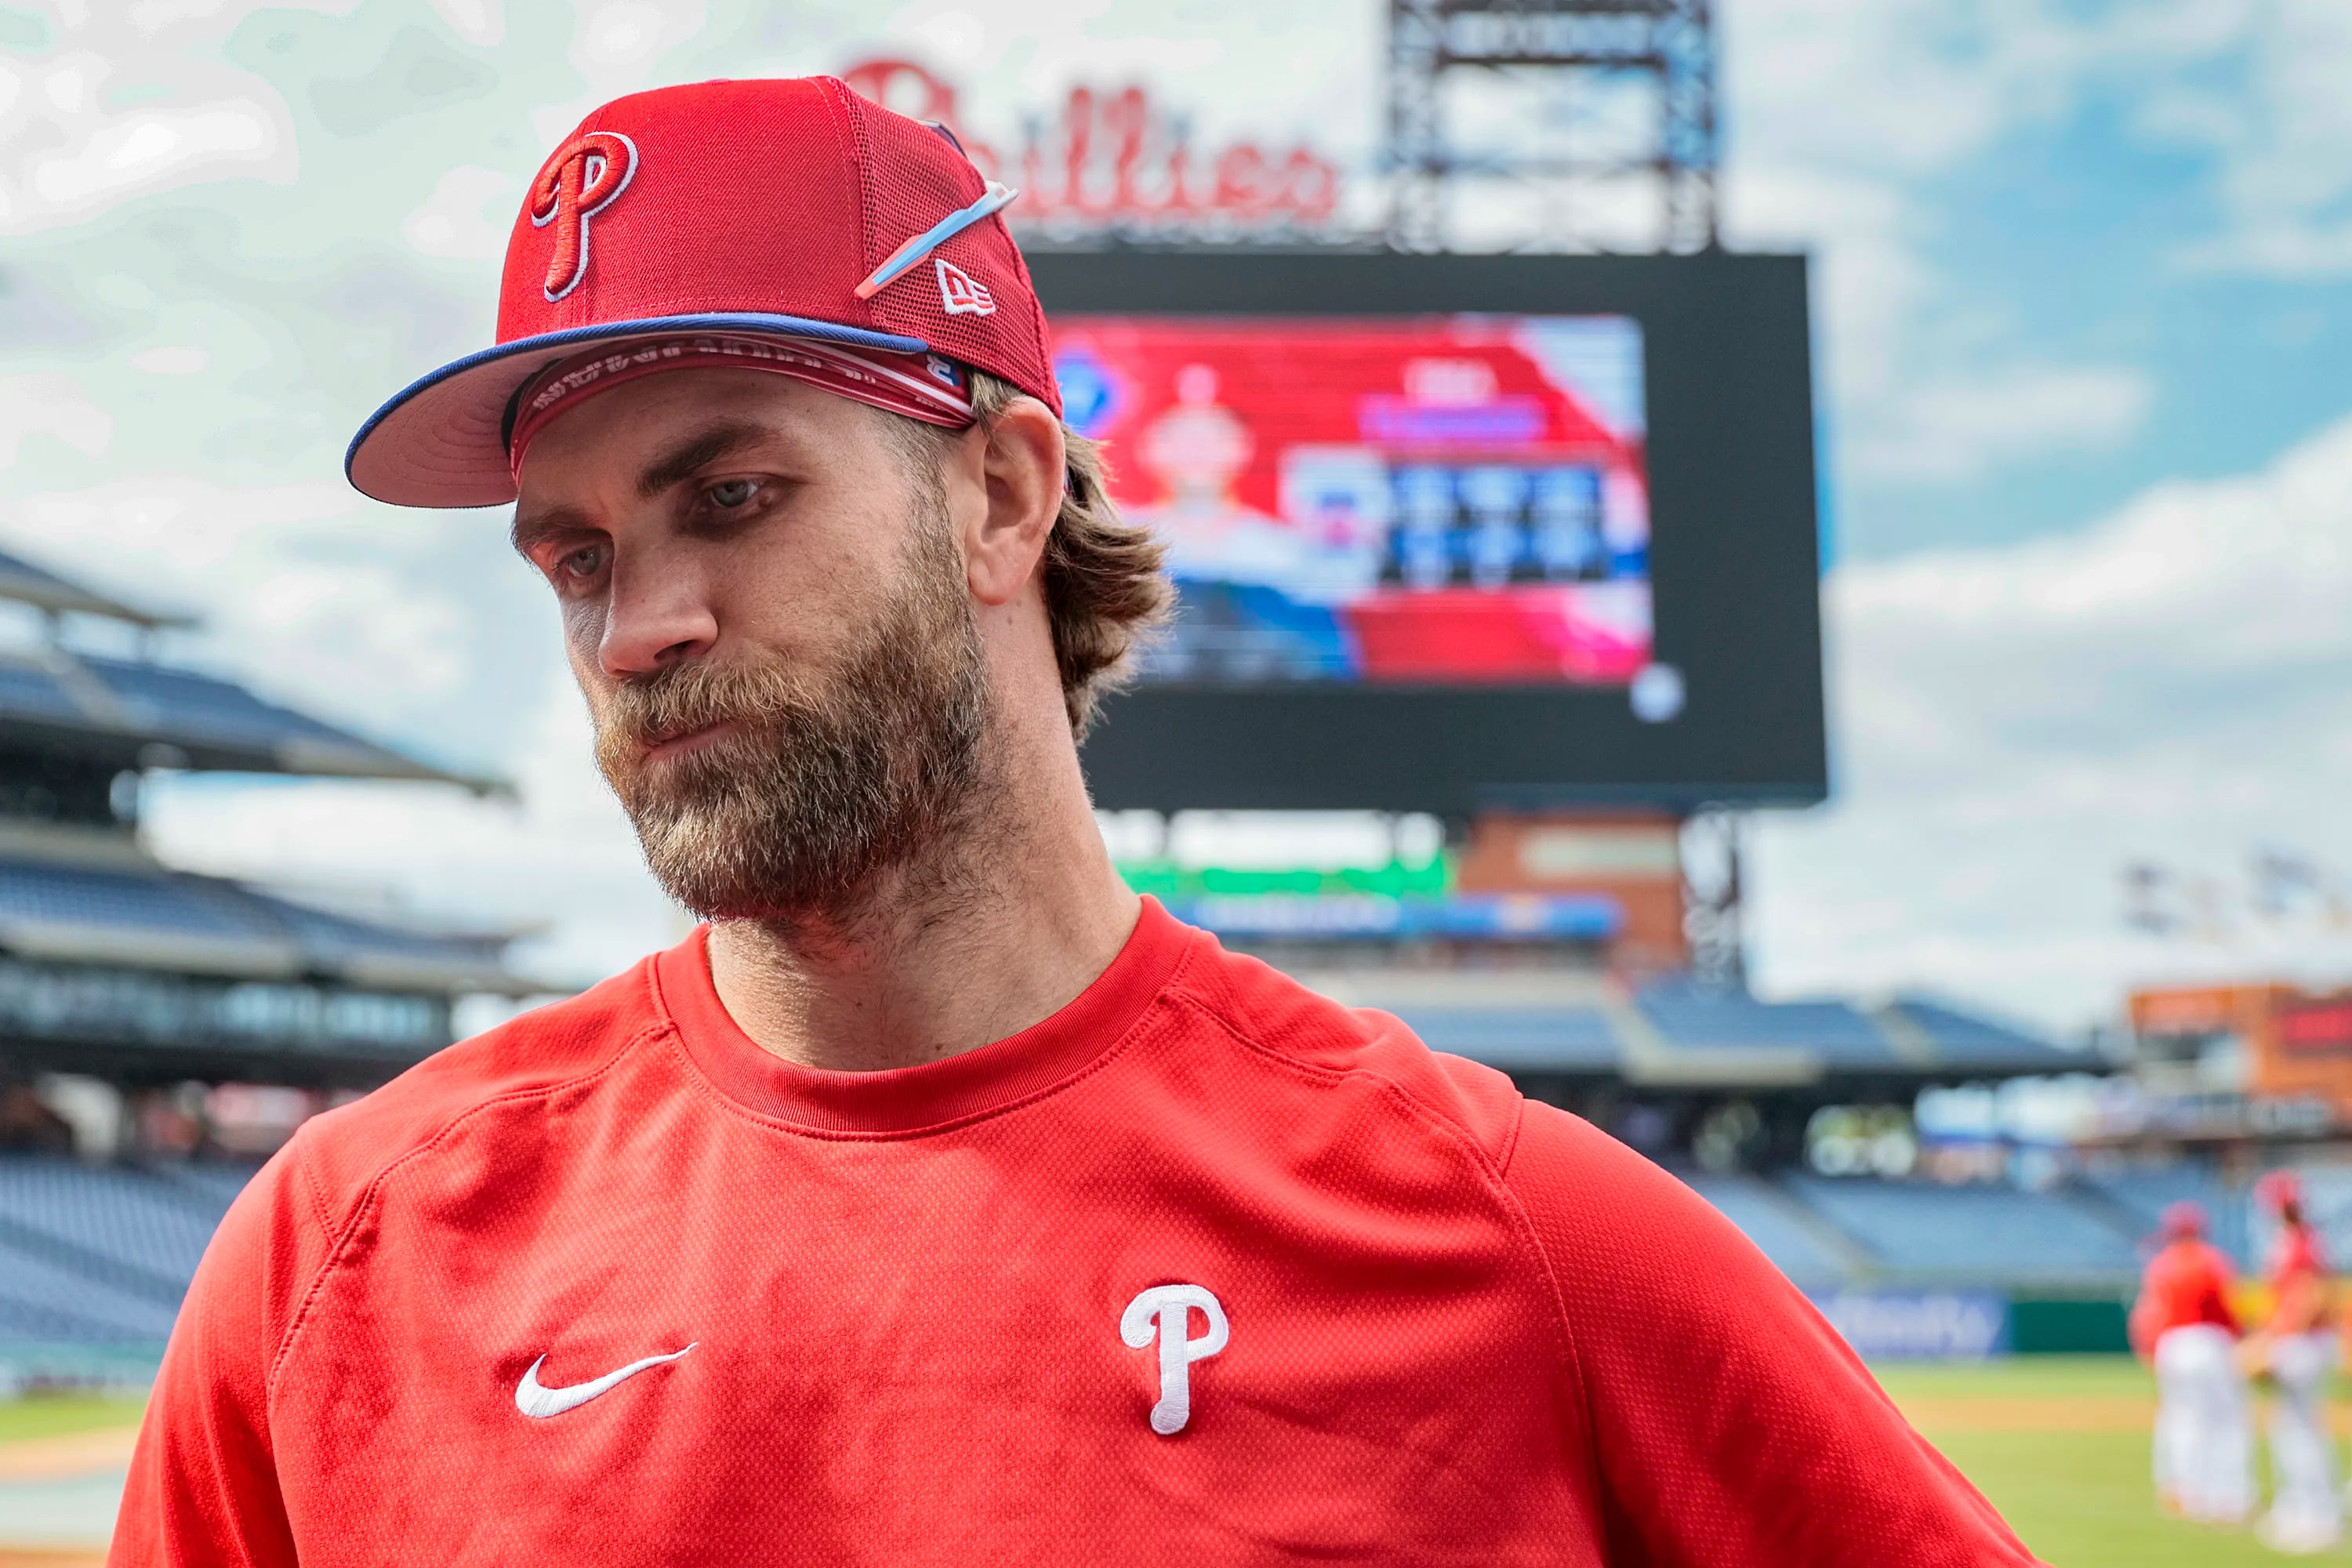 Bryce Harper expected back Tuesday, where will he hit in lineup?